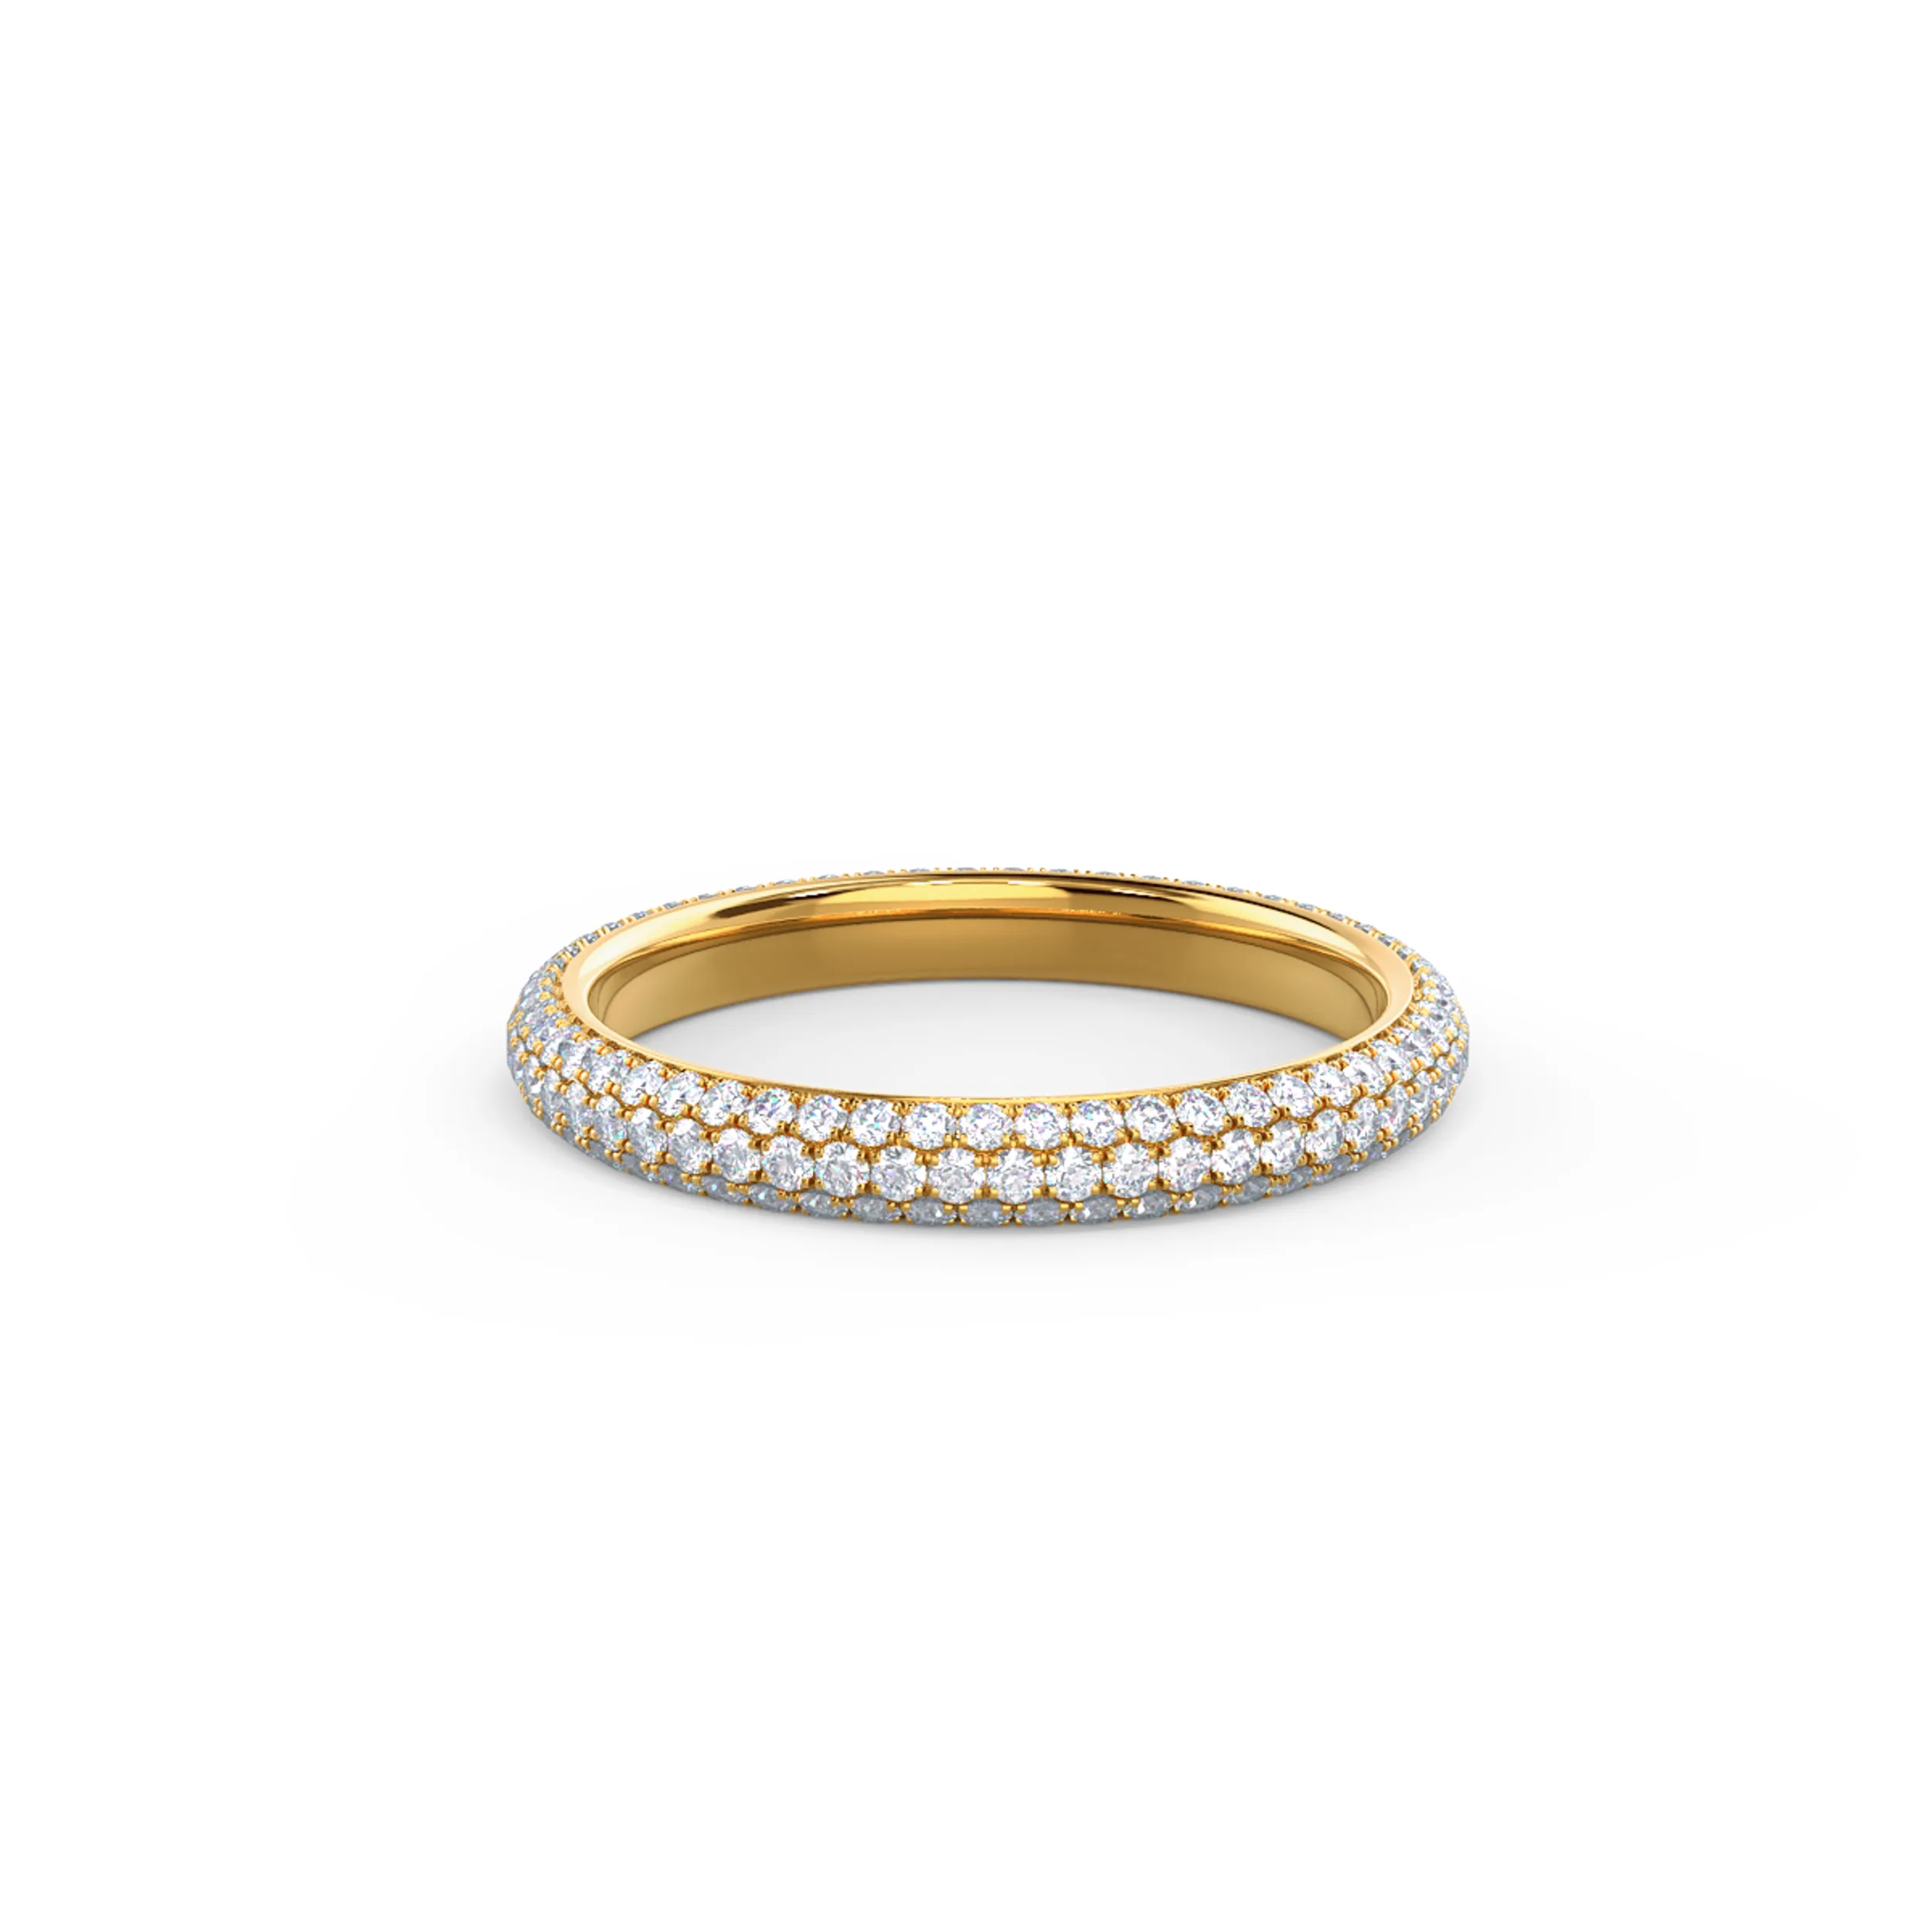 14 Karat Yellow Gold Three Sided Pavé Eternity Band featuring High Quality 0.8 ctw Round Lab Grown Diamonds (Main View)